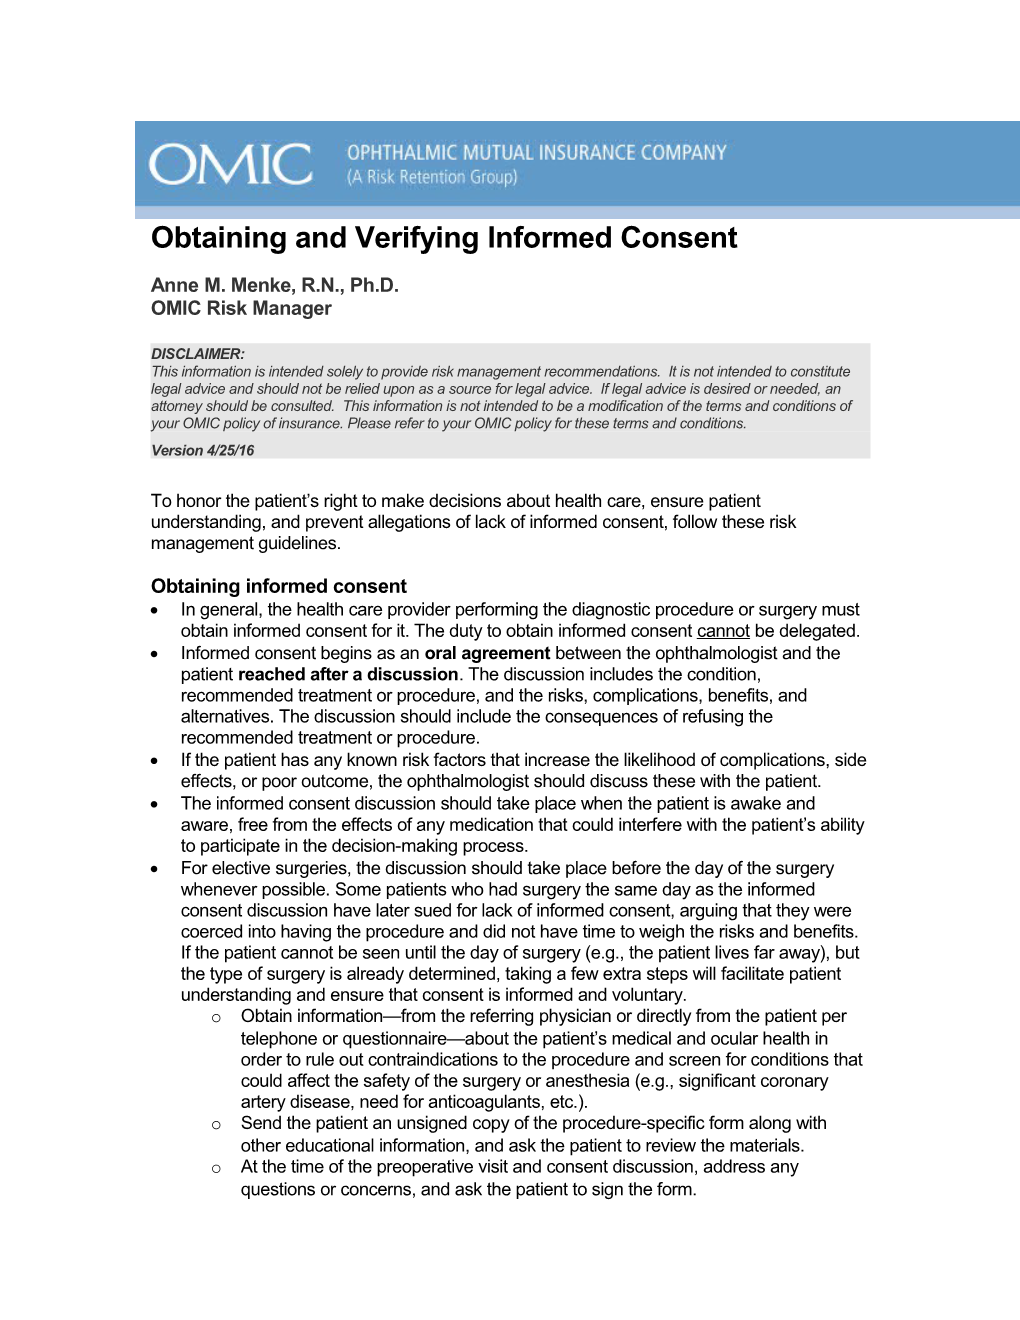 Obtaining and Verifying Informed Consent